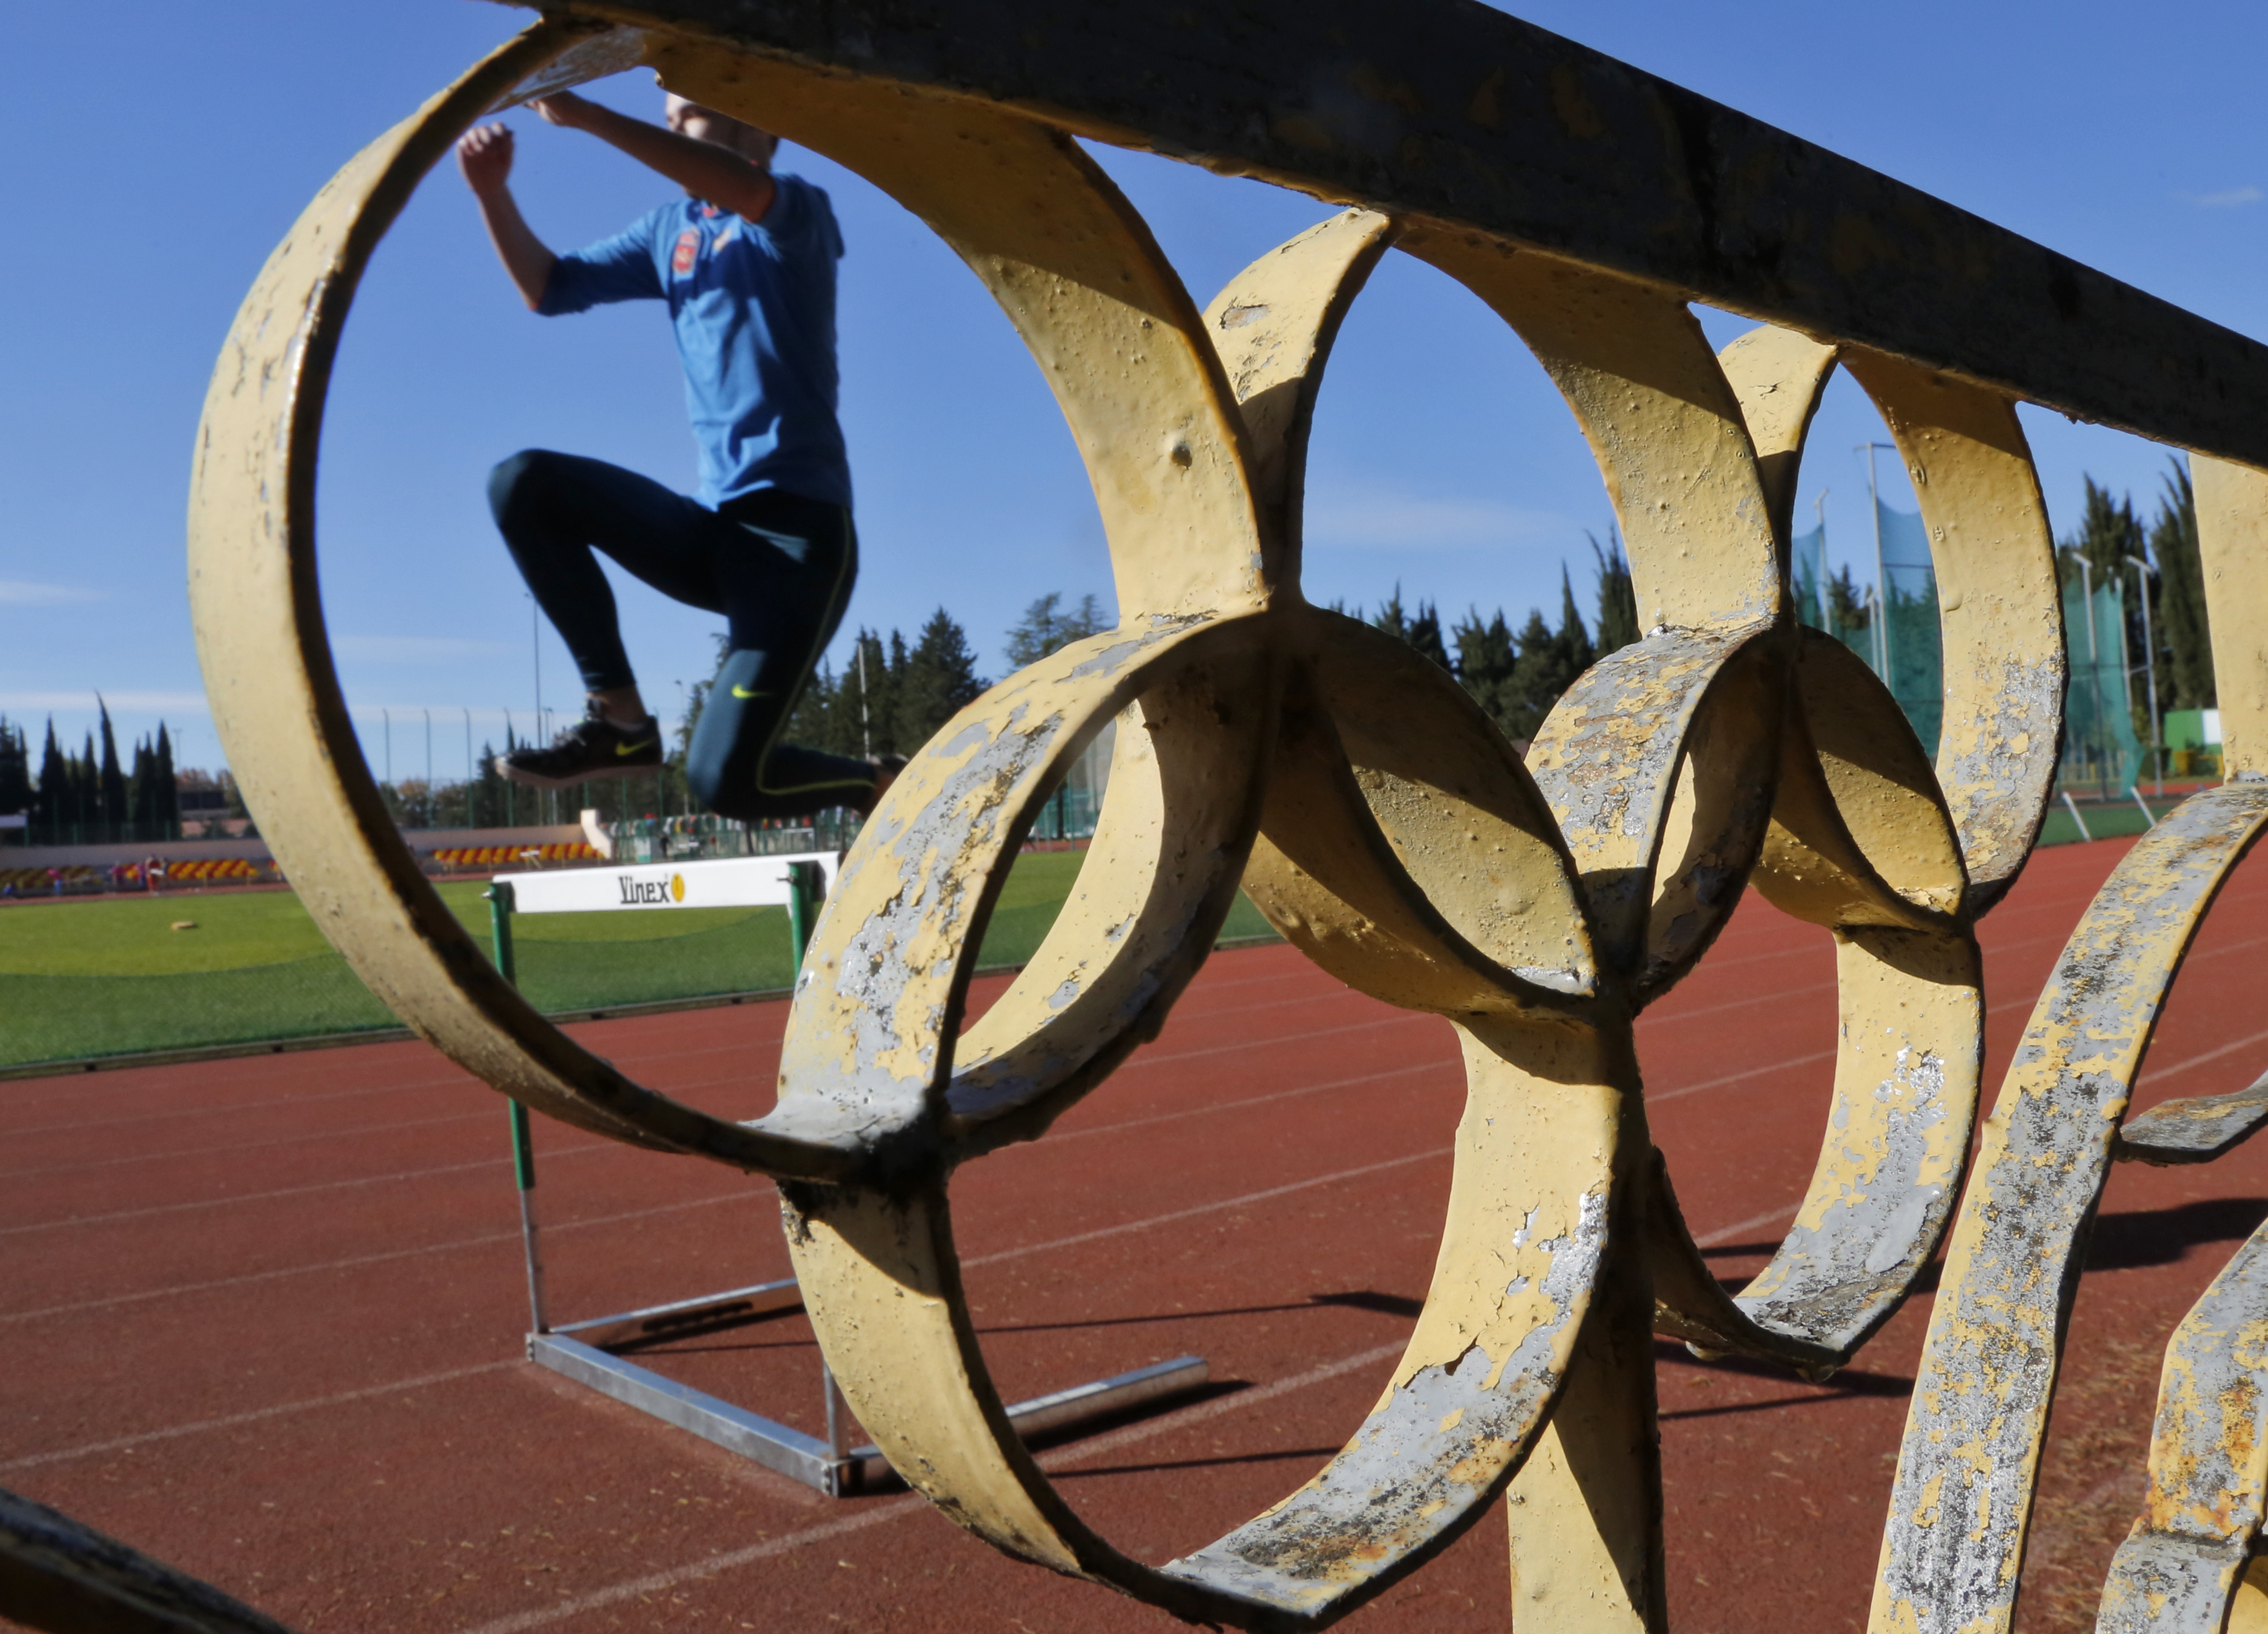 An athlete attends a training session at the ‘Yunost‘ sports ground at the Black Sea resort of Sochi, Russia, Thursday, Nov. 12, 2015. Facing allegations that Russia engages in extensive, state-sponsored doping, President Vladimir Putin on Wednesday called on sports officials to carry out an internal investigation - but said that clean athletes shouldn't be punished for the actions of those who take banned drugs. Sports are a substantial piece of Russia's self-esteem -- both in athletes' performances and its ability to host huge international events. AP Photo/Dmitry Lovetsky)